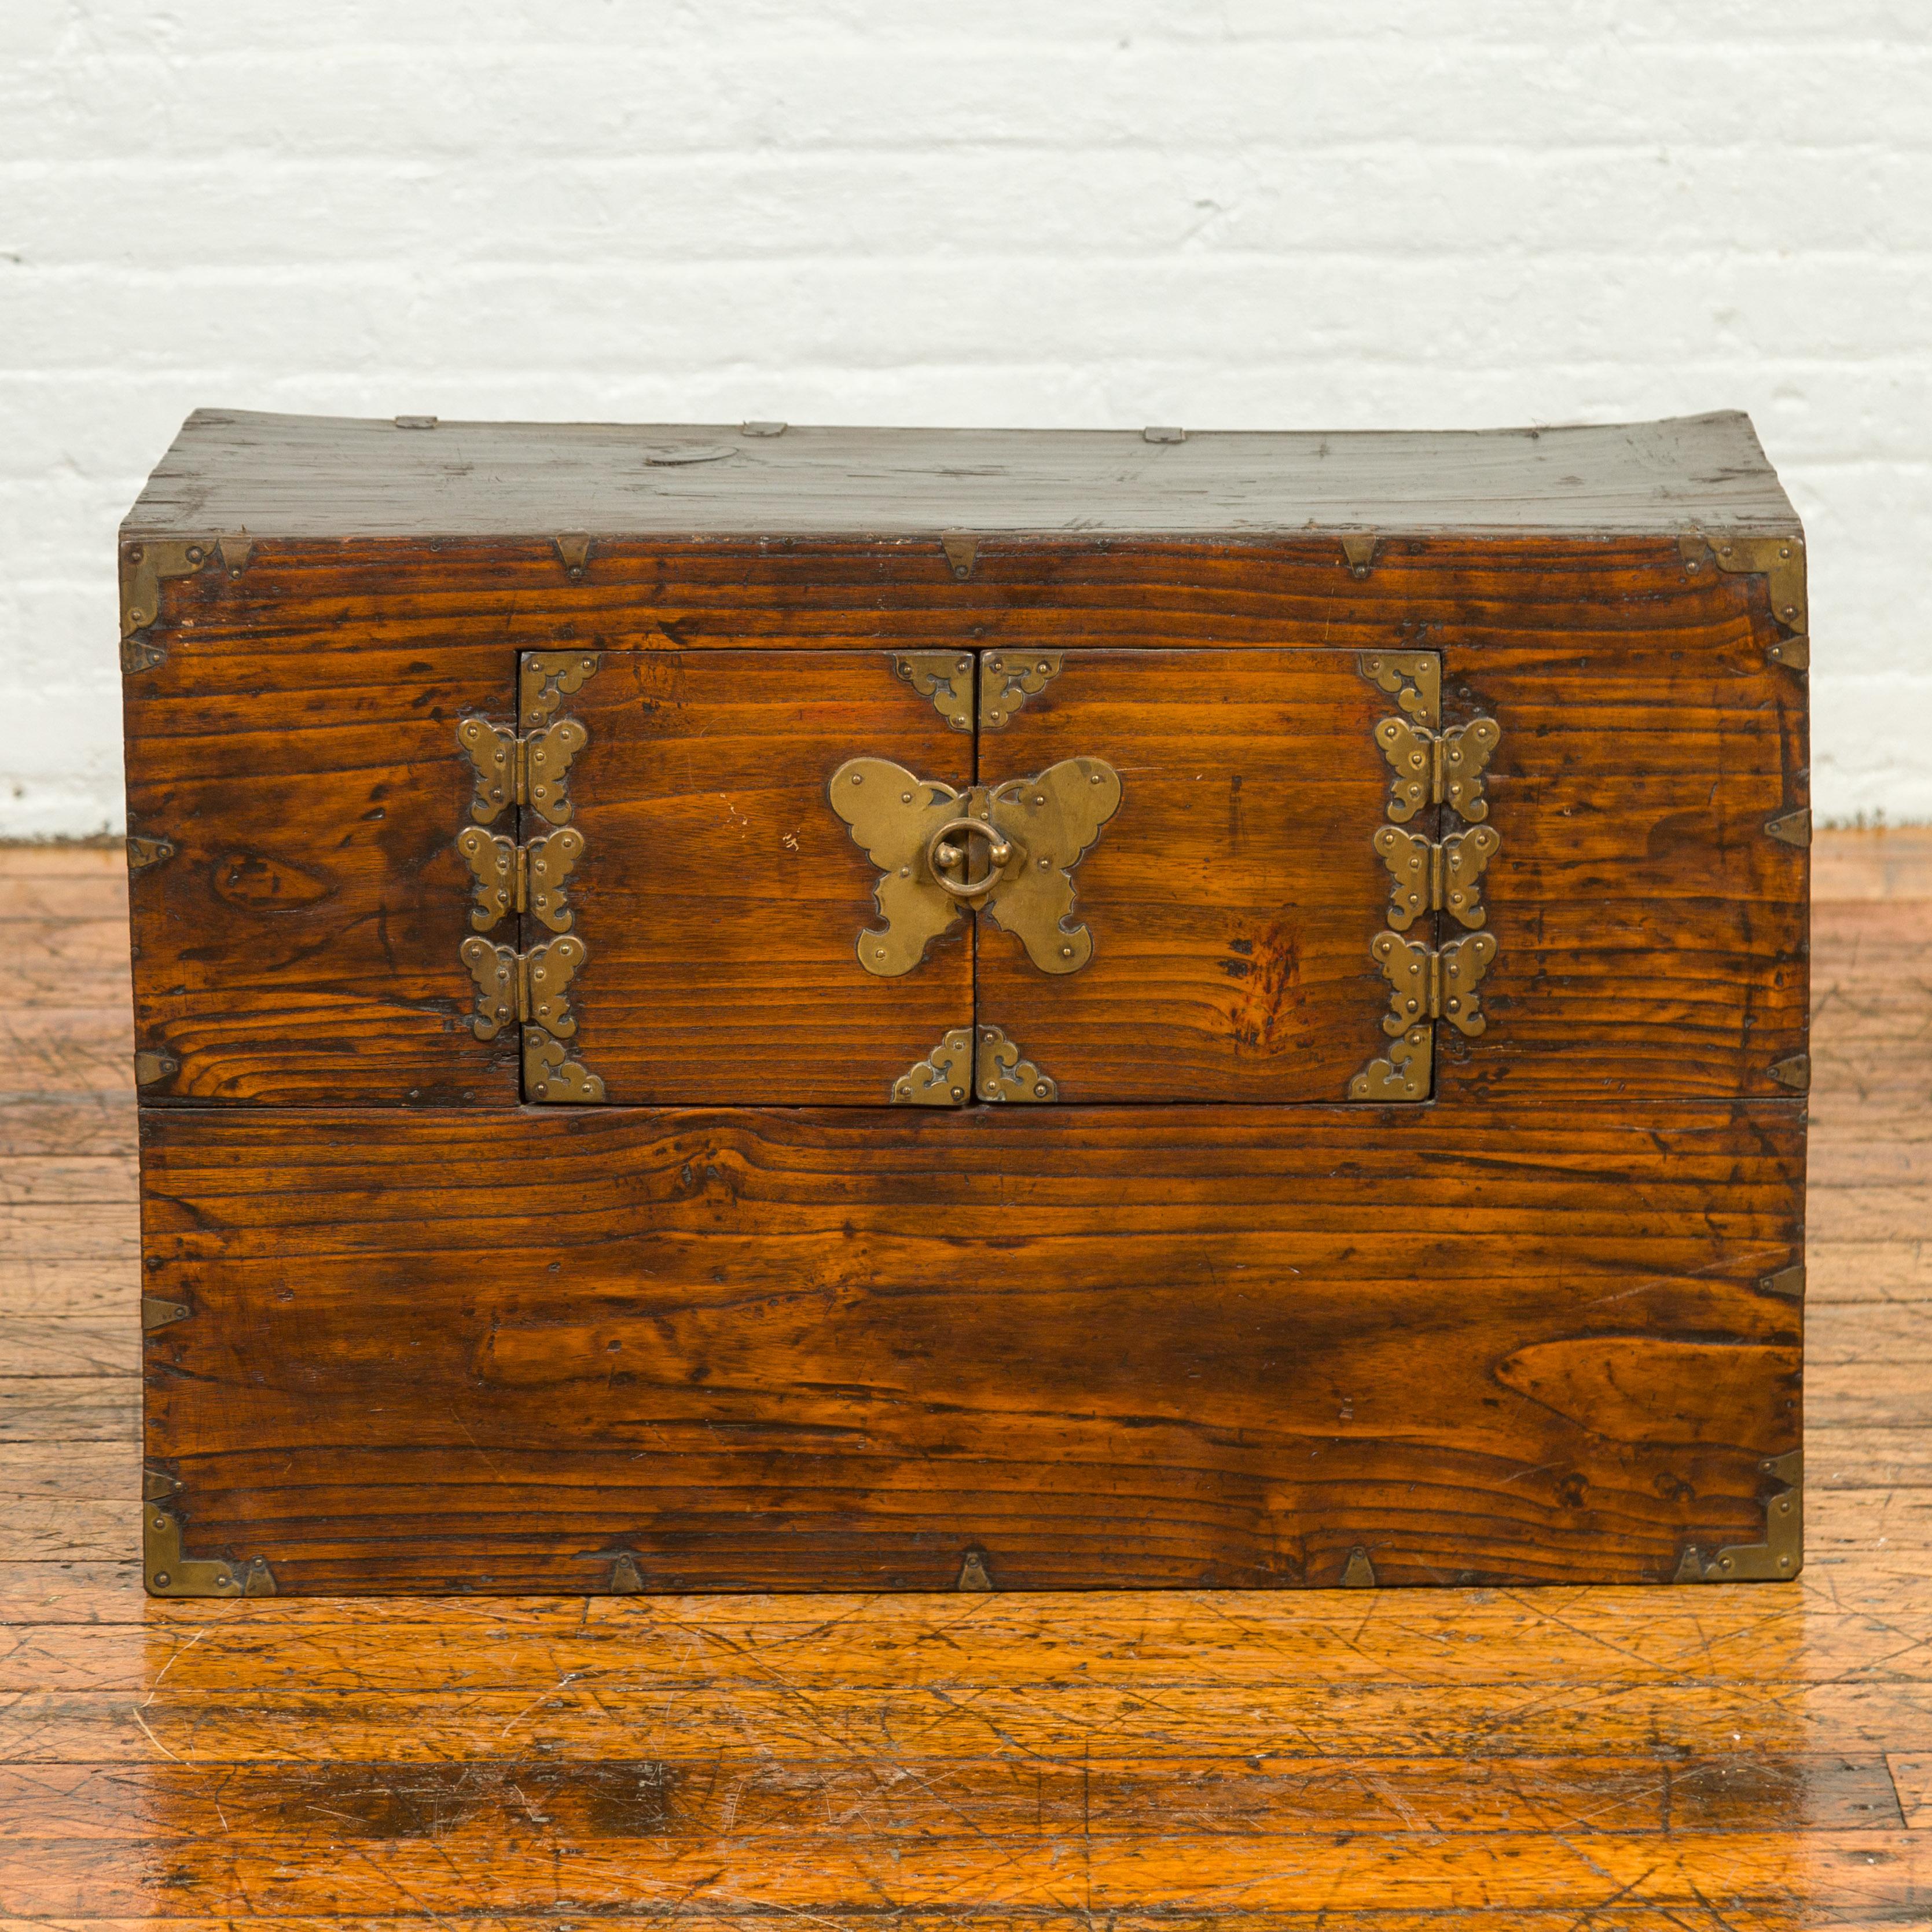 A Korean wooden side chest from the 19th century with double doors and brass butterfly-shaped hardware. Crafted in Korea during the 19th century, this small cabinet features a rectangular top sitting above a simple façade showcasing a pair of small